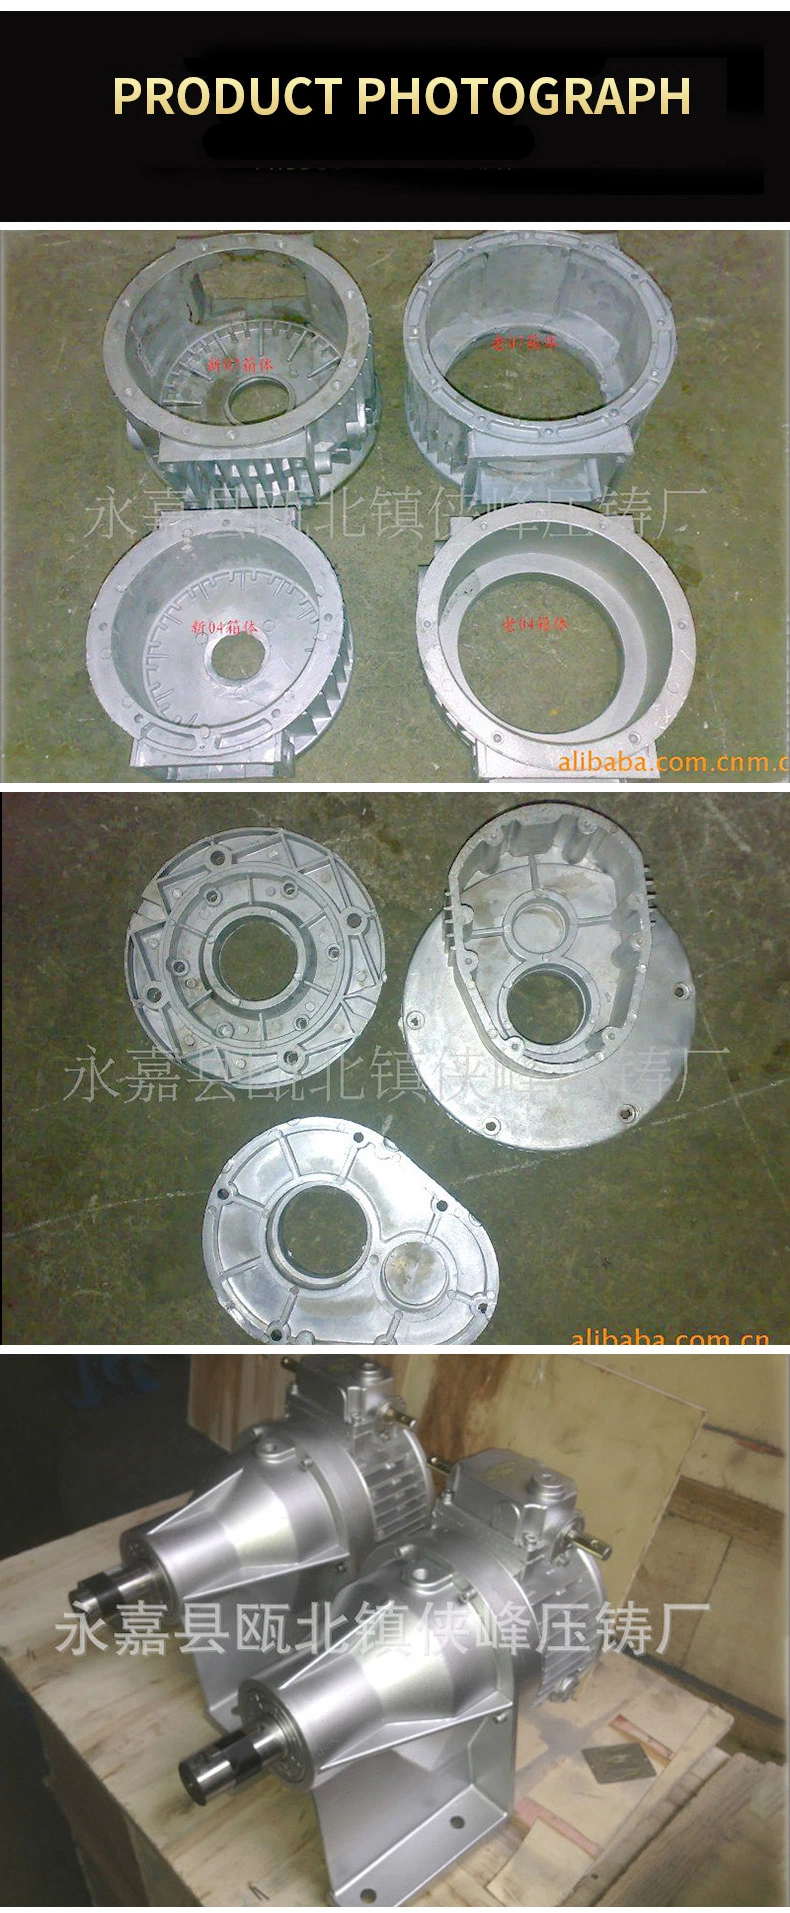 Wb Micro Cycloidal Speed Reducer Accessories Marine Gearbox for Mechanical Equipment